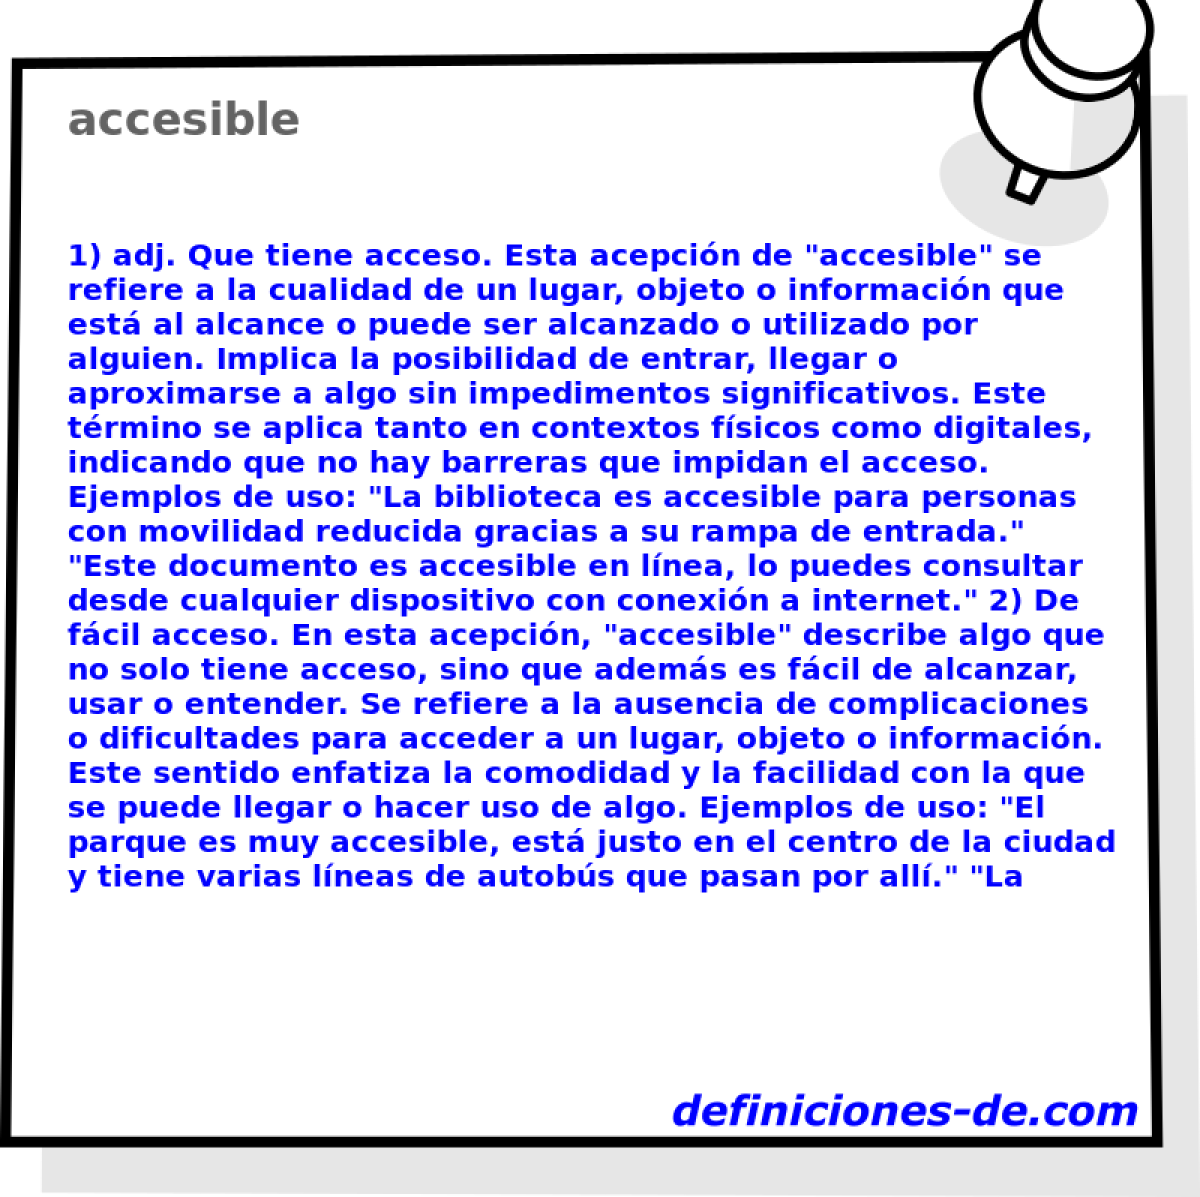 accesible 